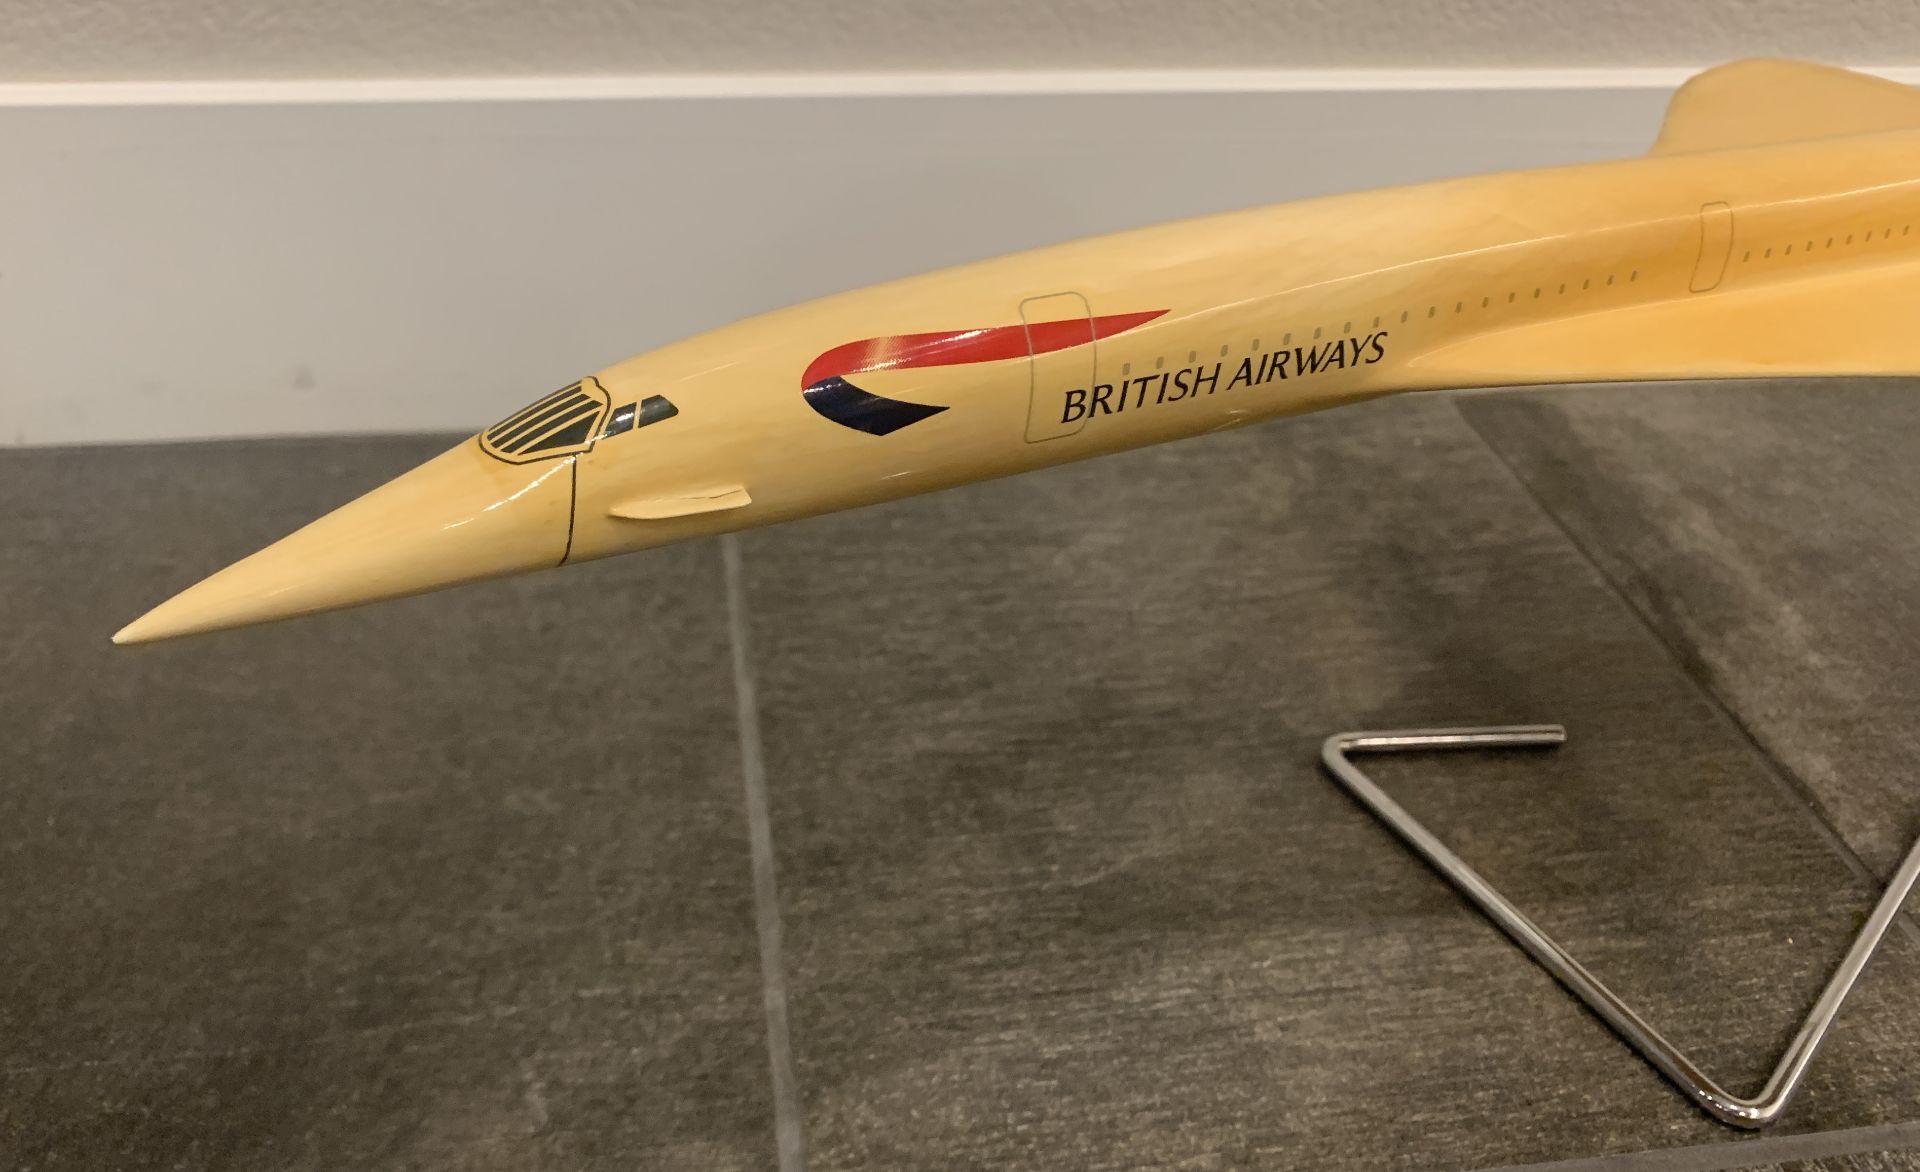 British Airways Concorde + Space Shuttle Jet Model On Stand Rare Vintage - Image 4 of 7